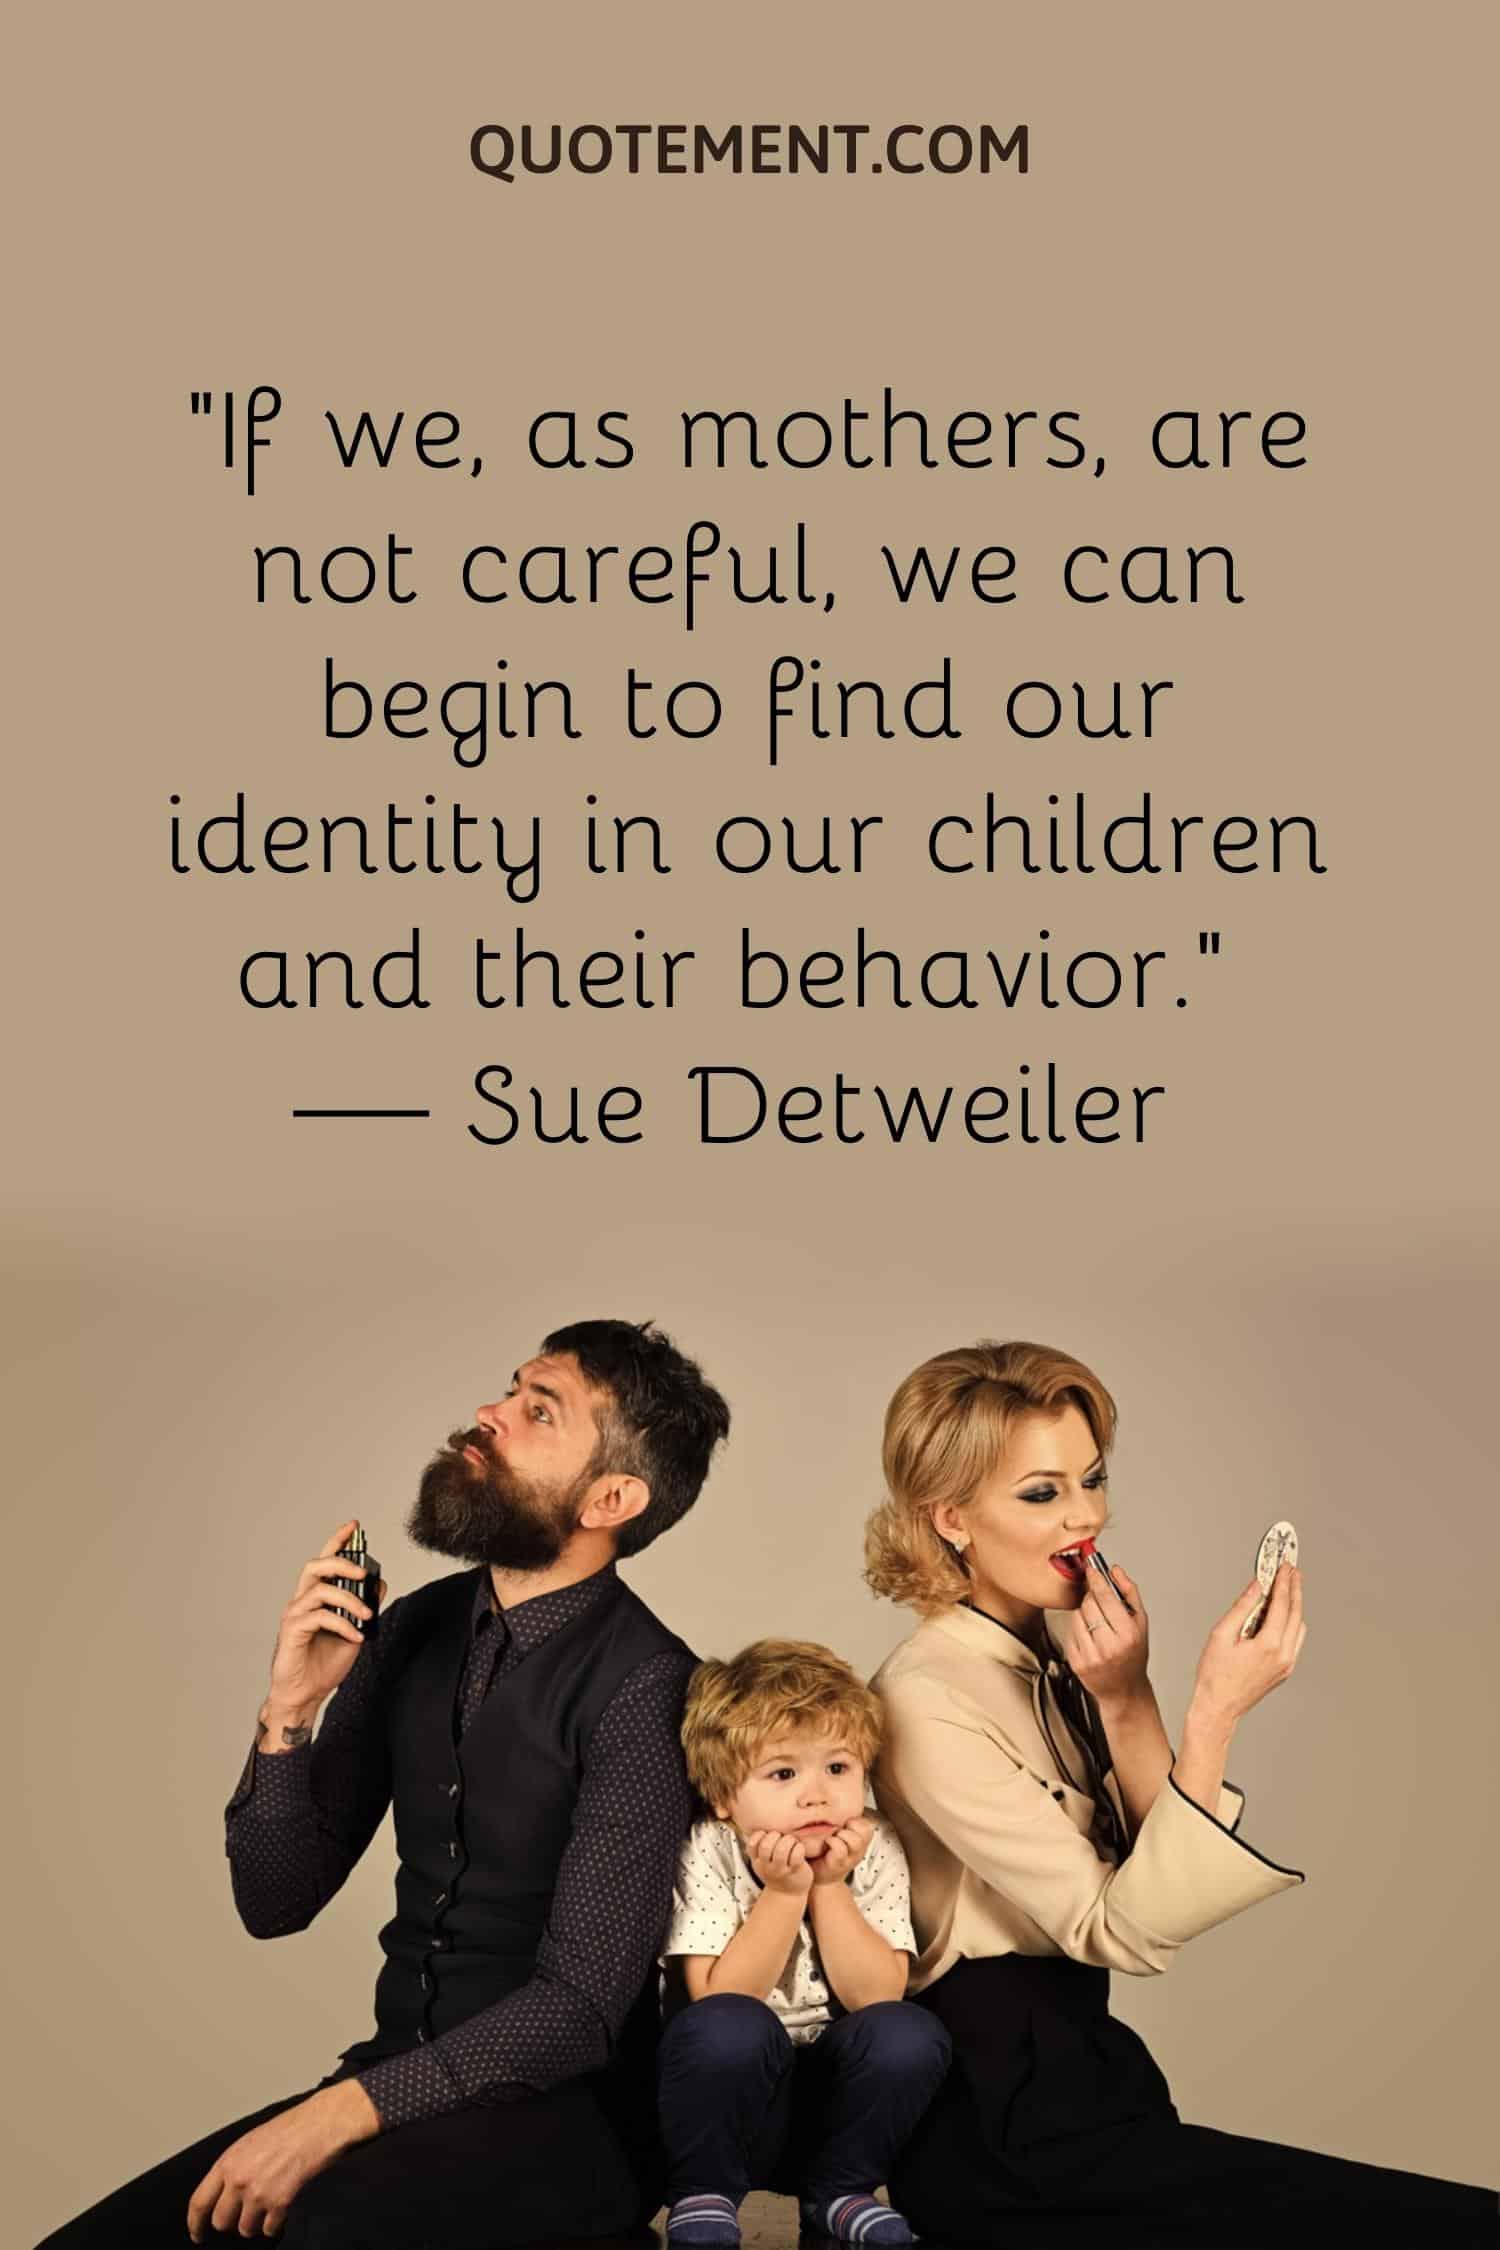 we can begin to find our identity in our children and their behavior